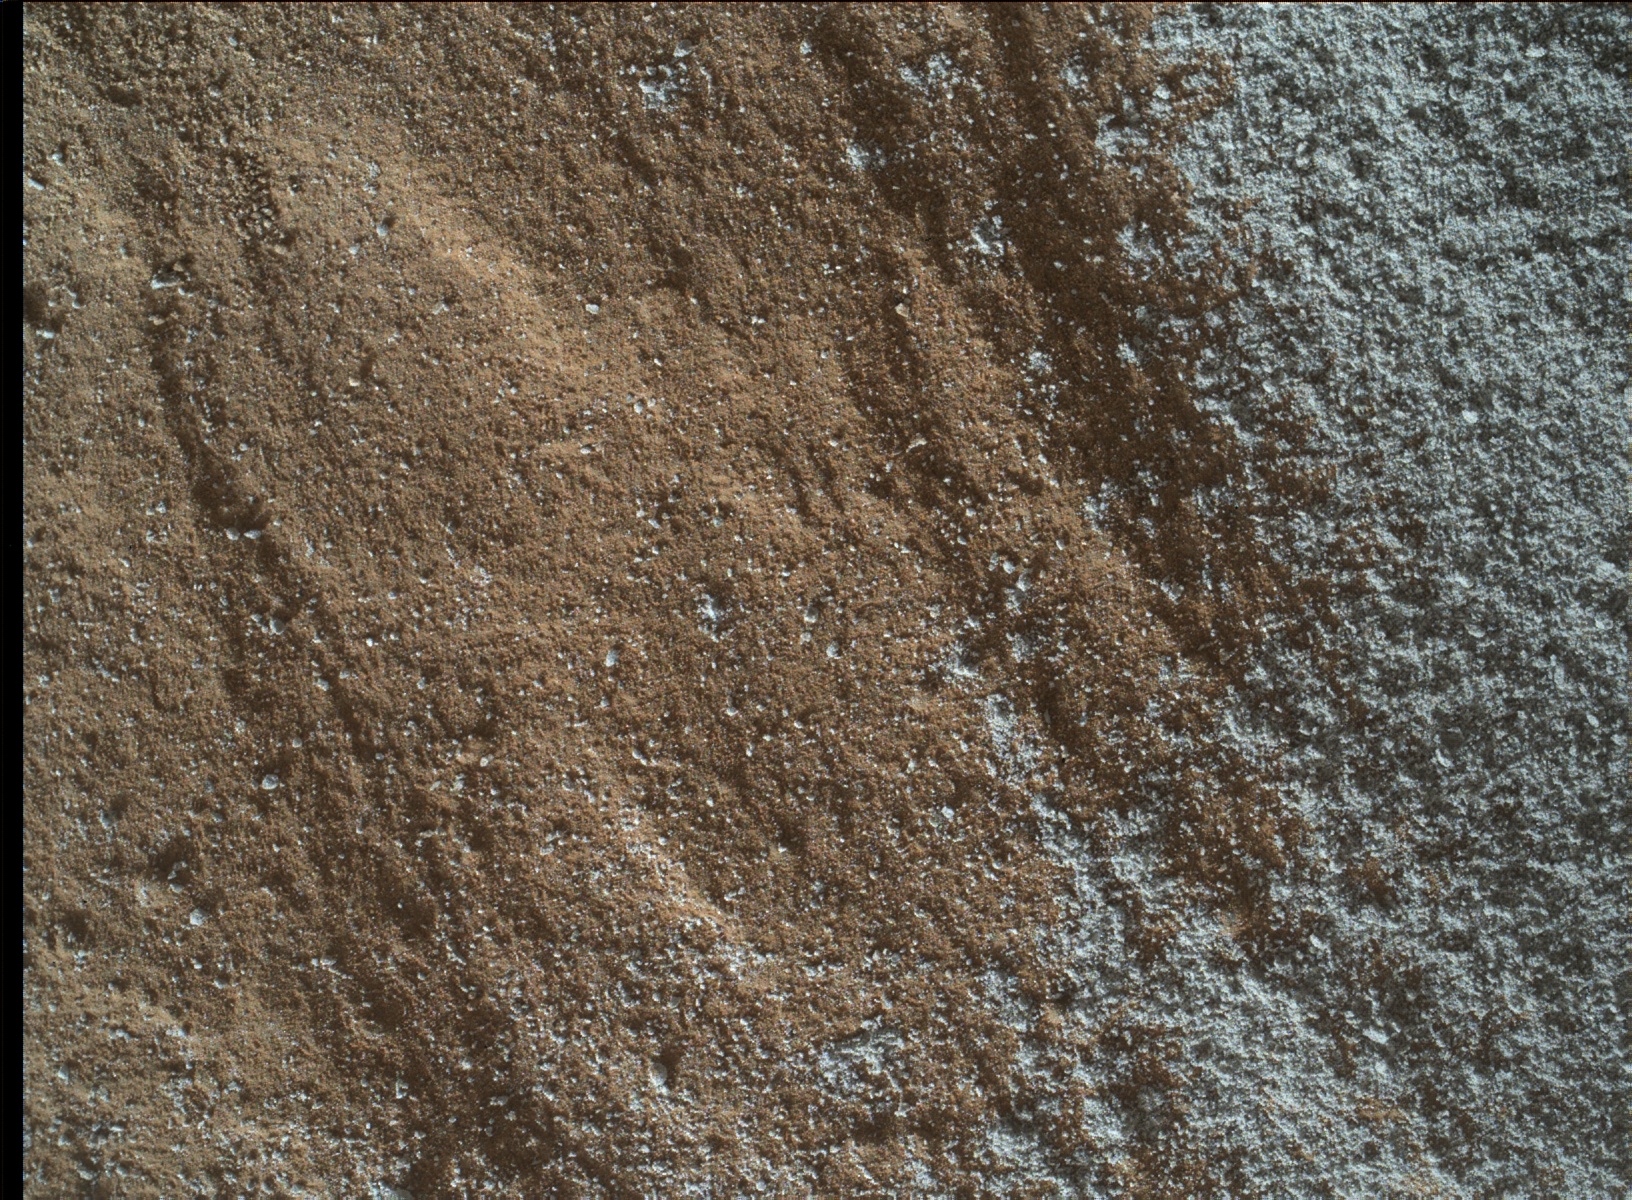 Nasa's Mars rover Curiosity acquired this image using its Mars Hand Lens Imager (MAHLI) on Sol 1327